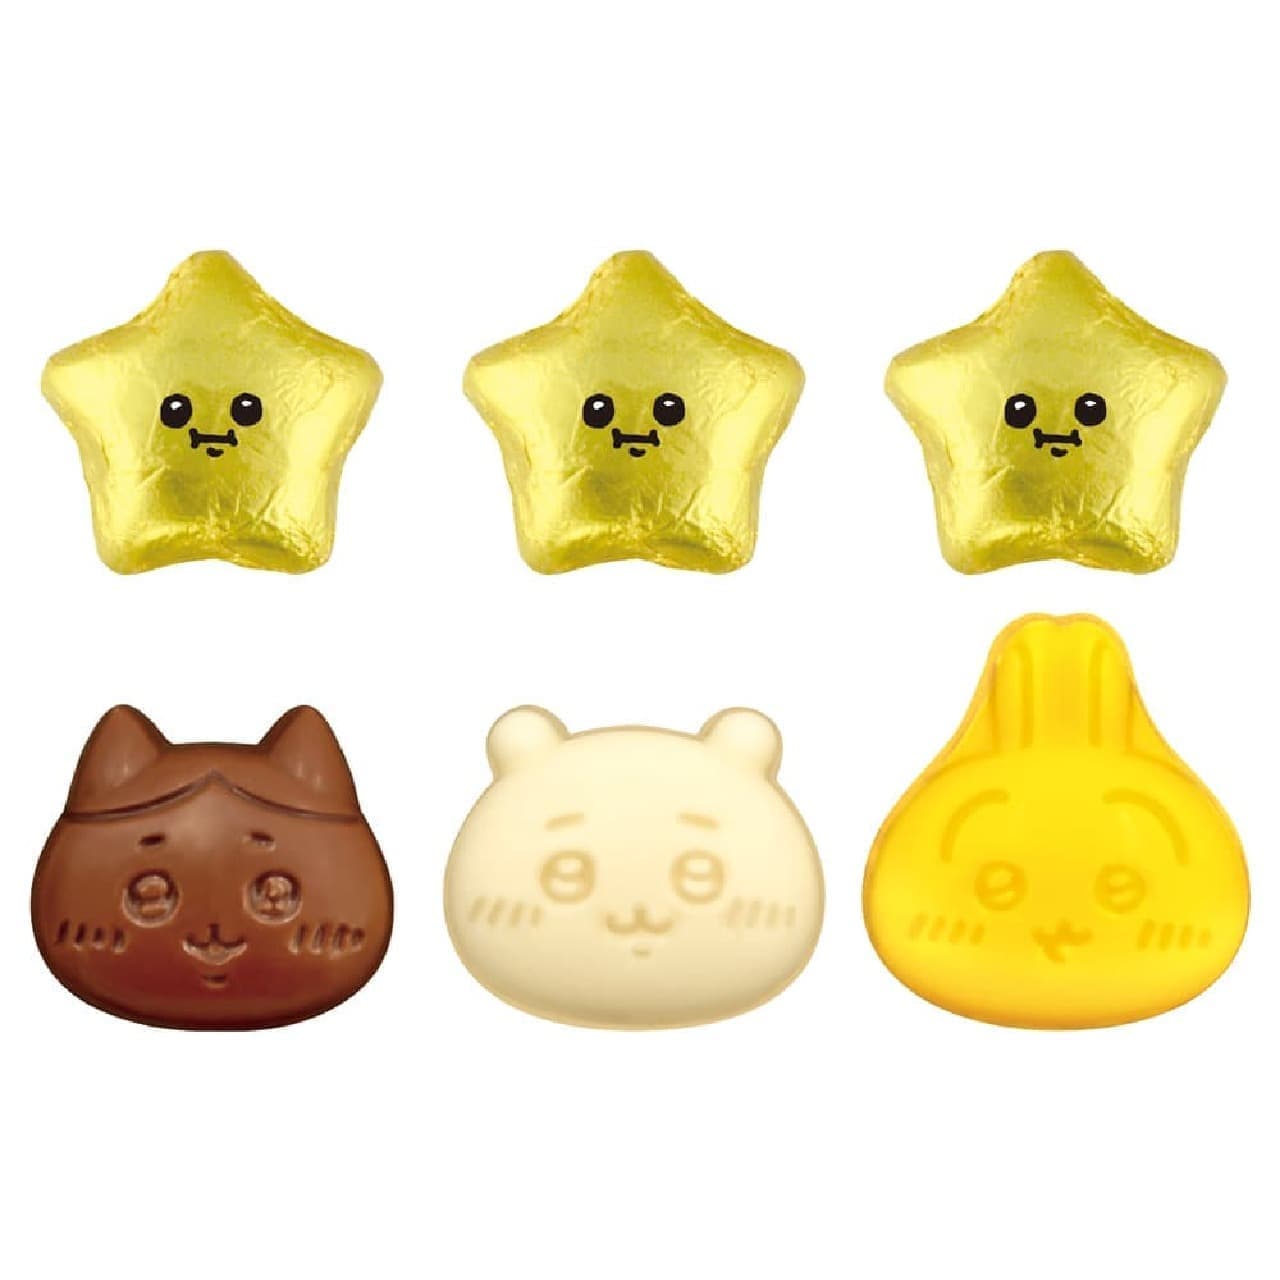 Small and cute chocolate assortment